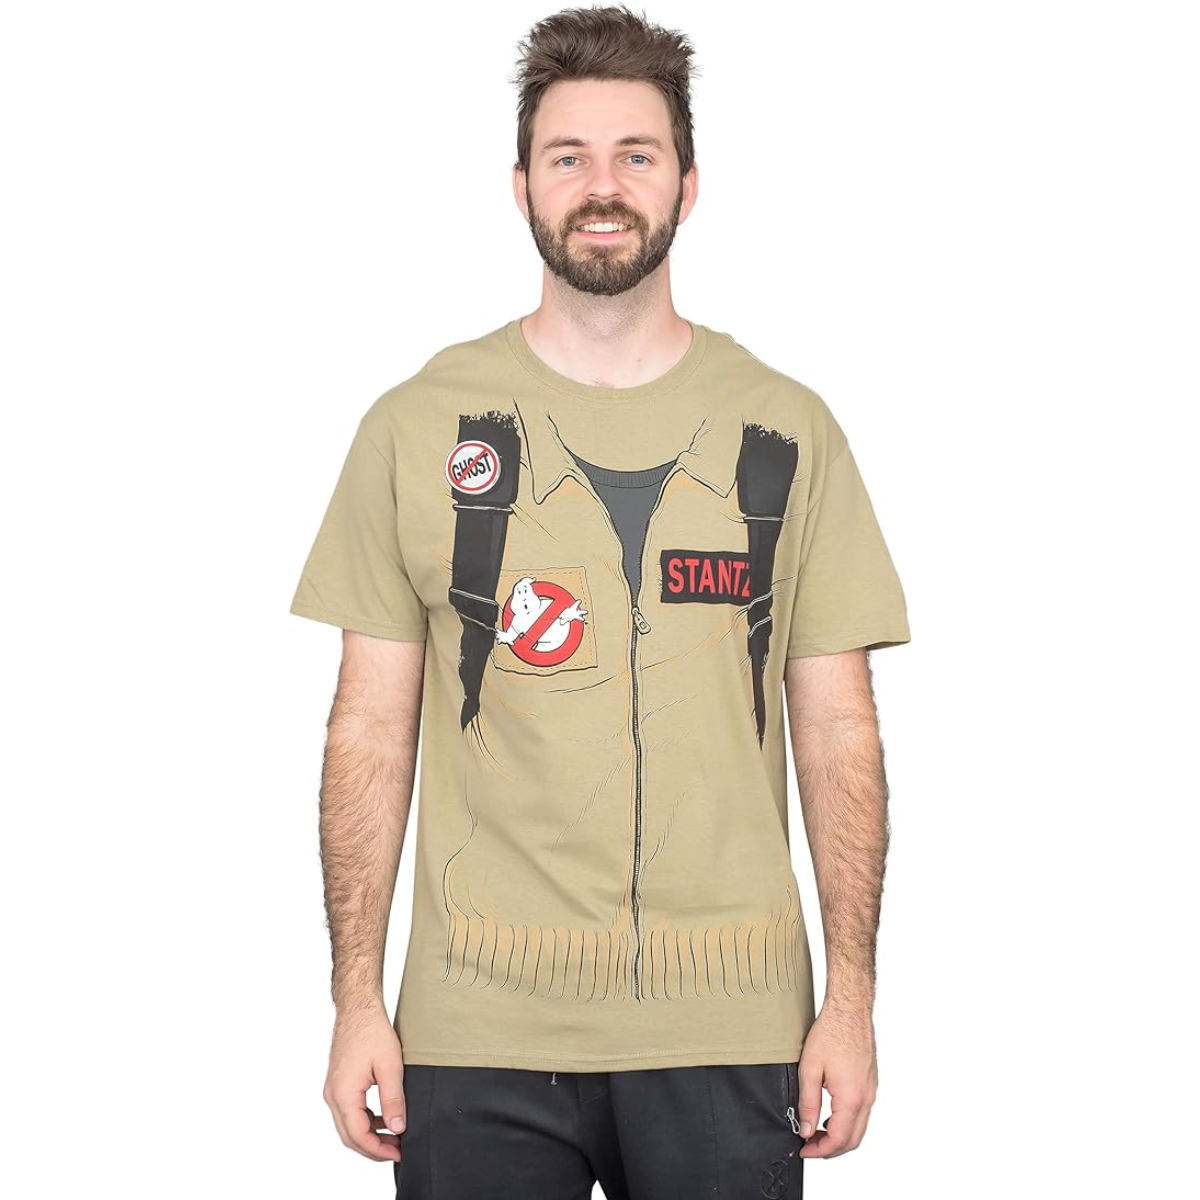 Ghostbuster Short Sleeve Costume T-Shirt with Back Print